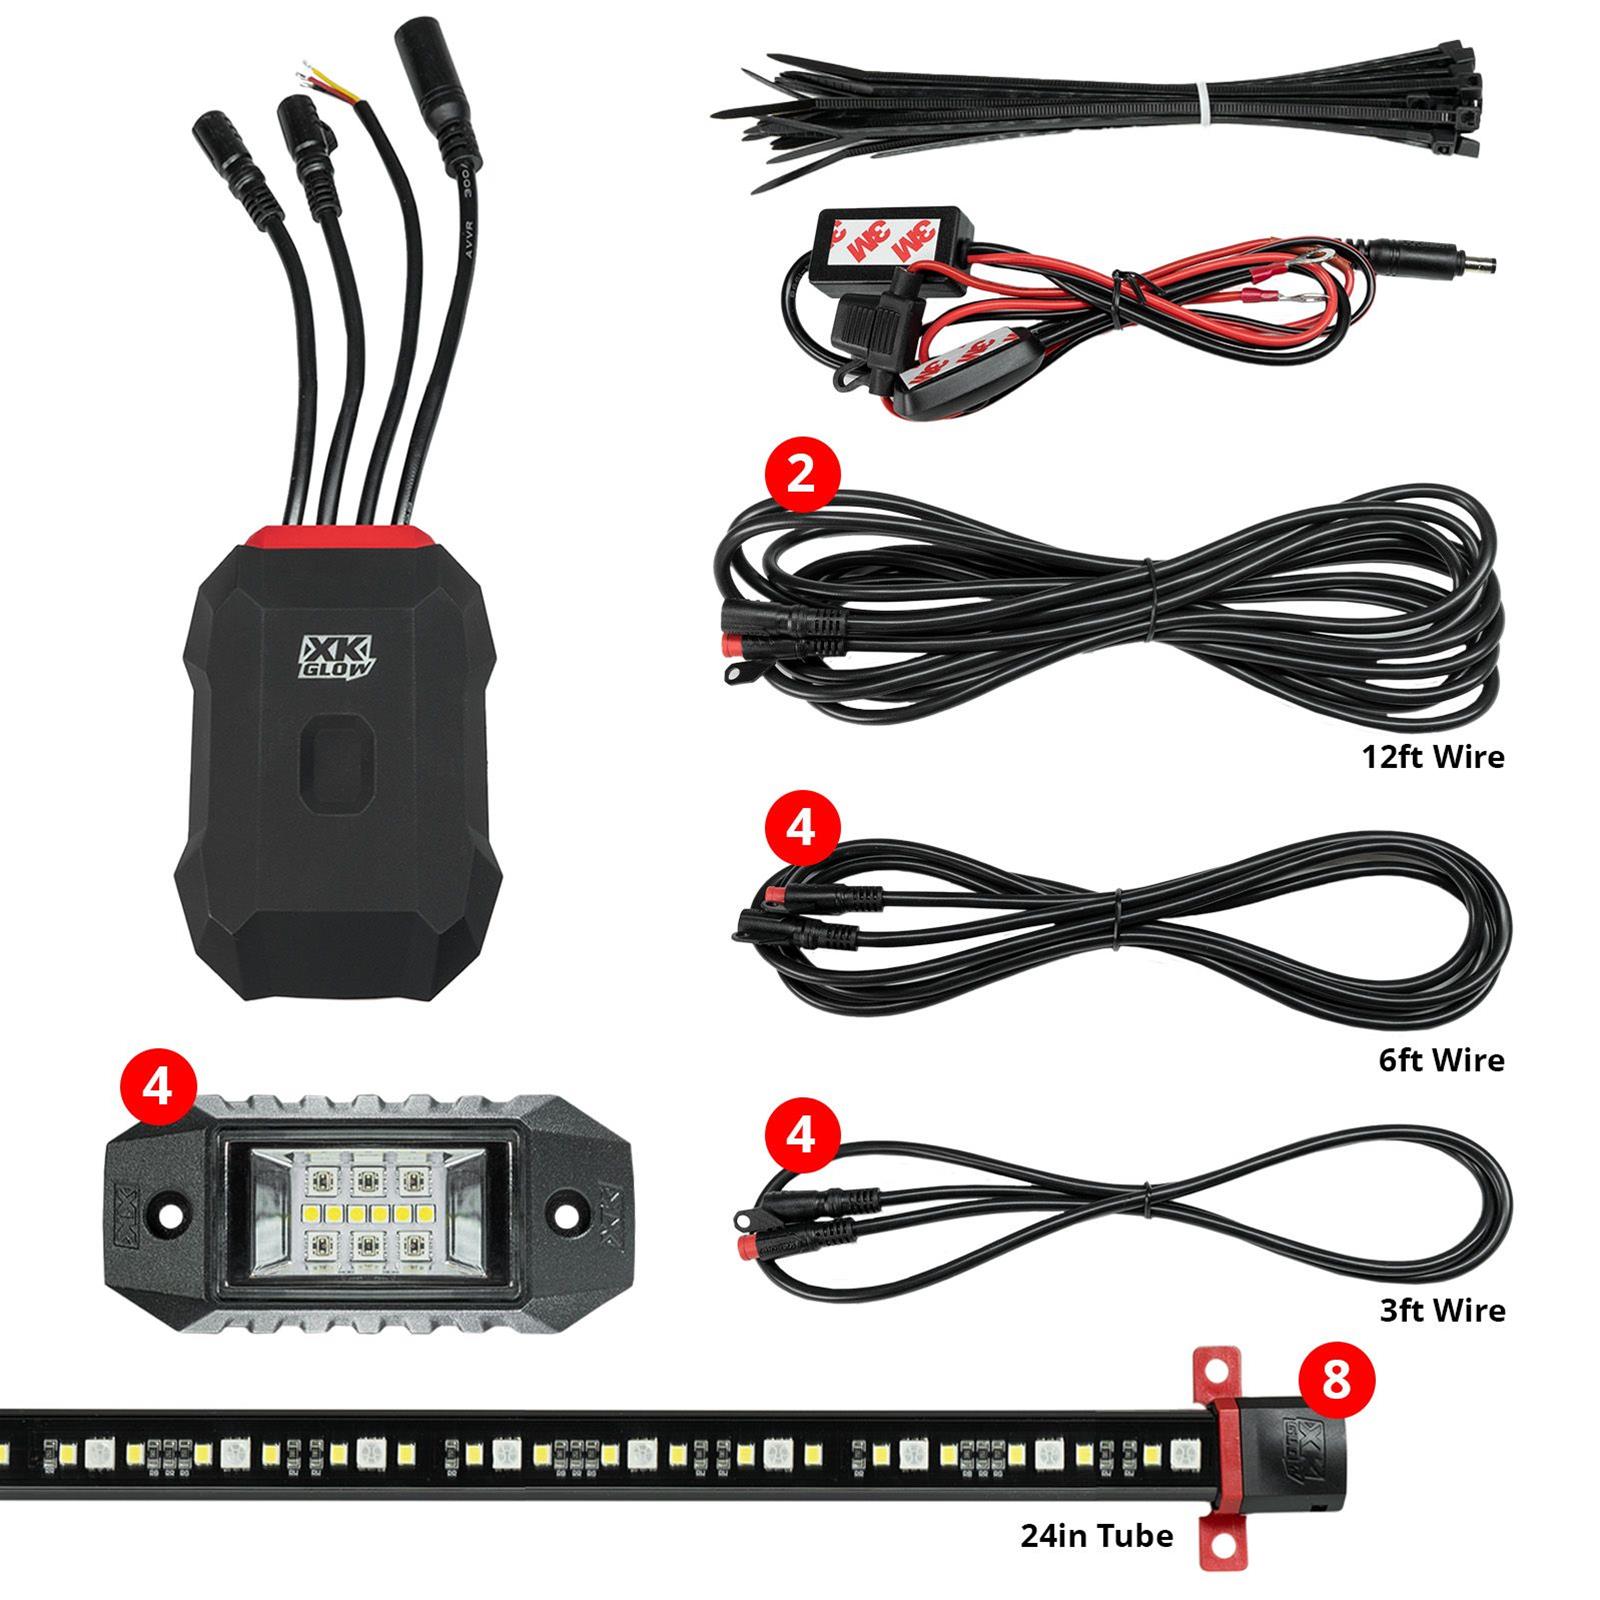 Smartphone App LED Car Accent Light Kits from XKGLOW